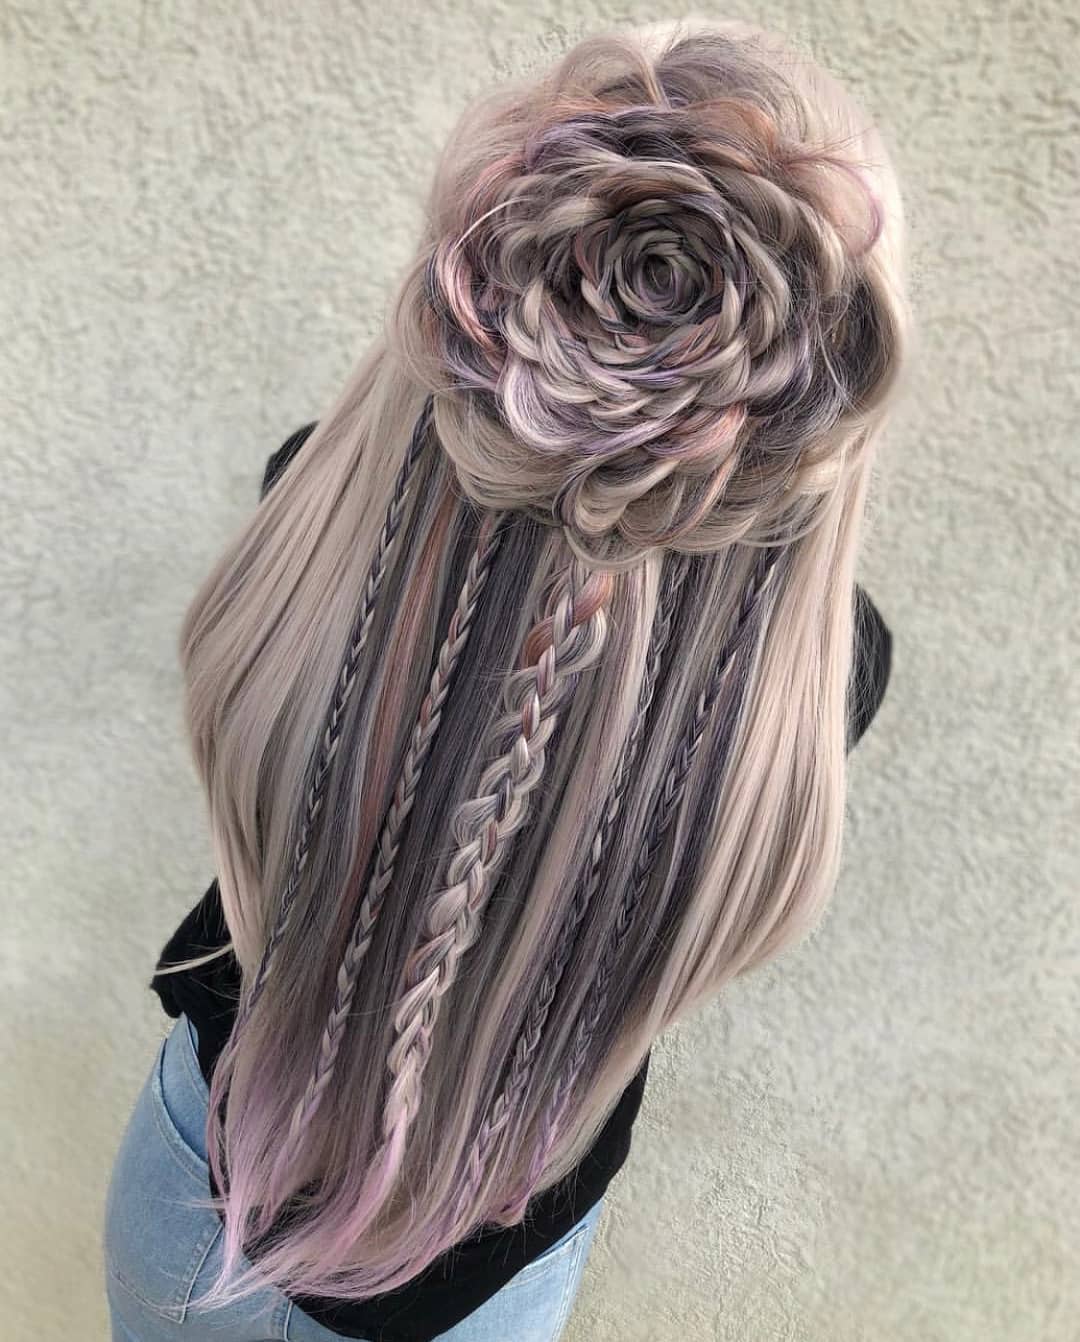 10 Amazing Braided Hairstyles For Long Hair 2020 Women